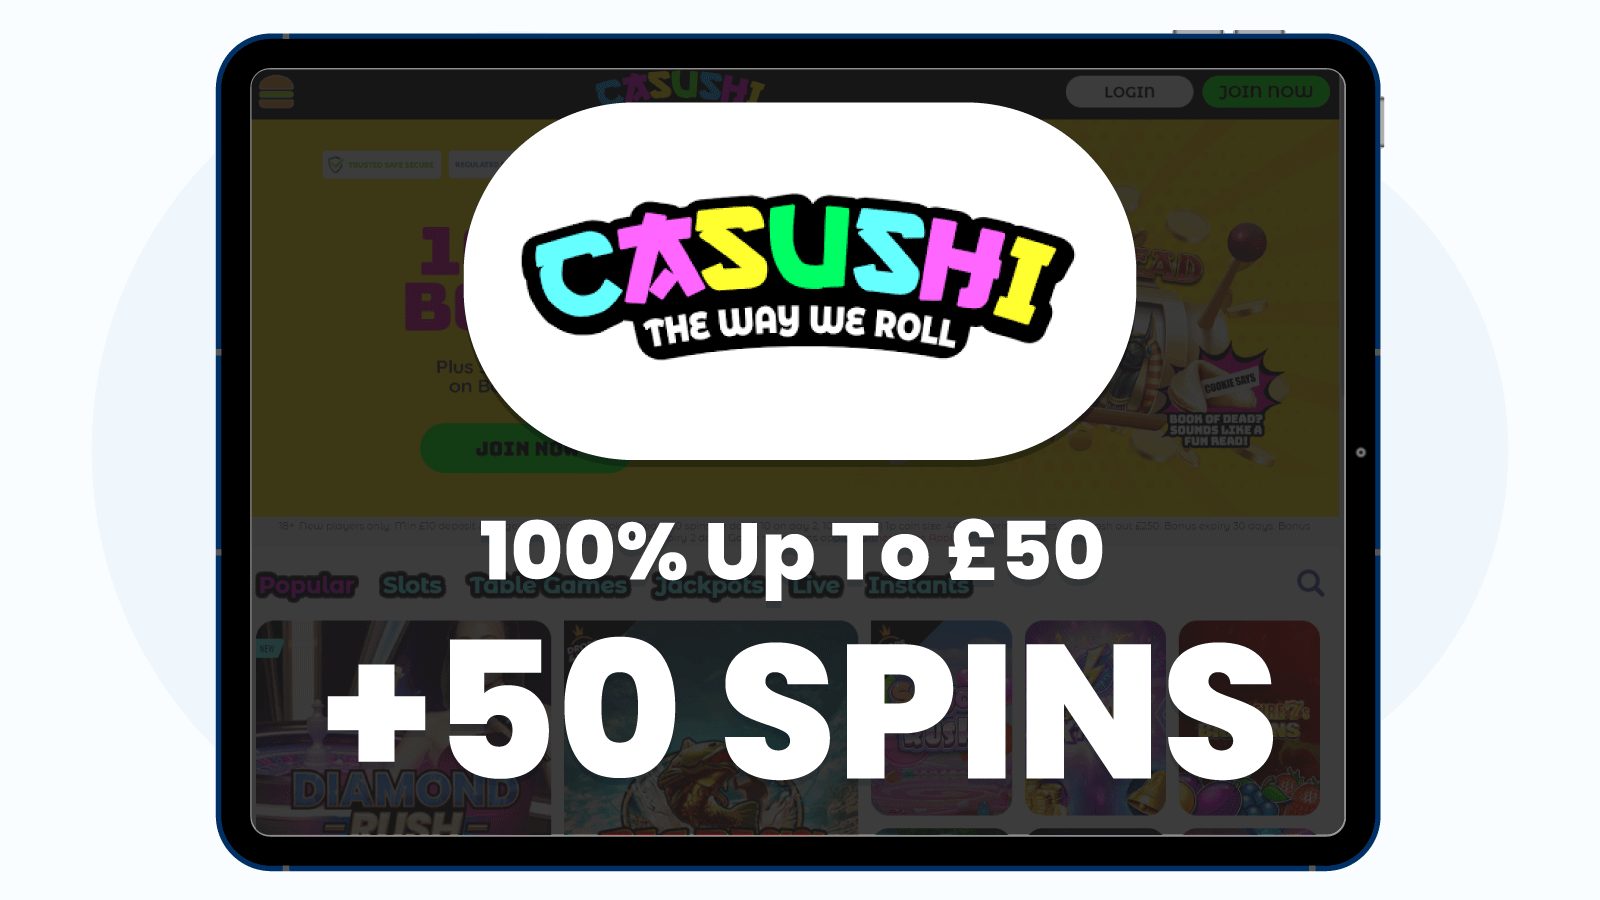 100% Bonus Up To £50 + 50 Free Spins On Book Of Dead At Casushi Casino